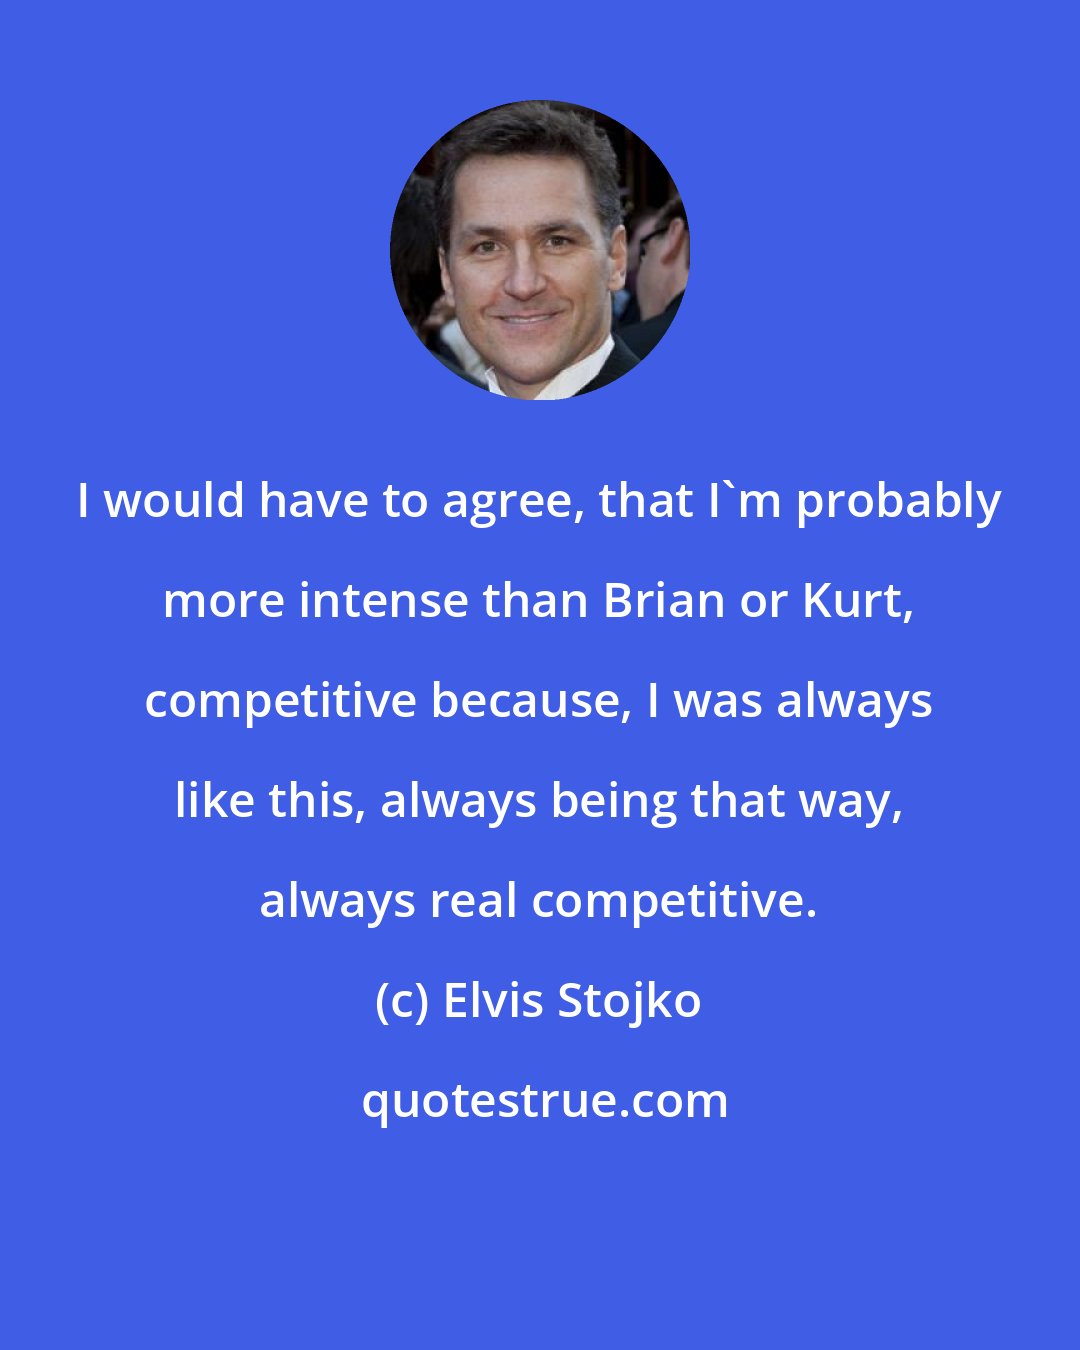 Elvis Stojko: I would have to agree, that I'm probably more intense than Brian or Kurt, competitive because, I was always like this, always being that way, always real competitive.